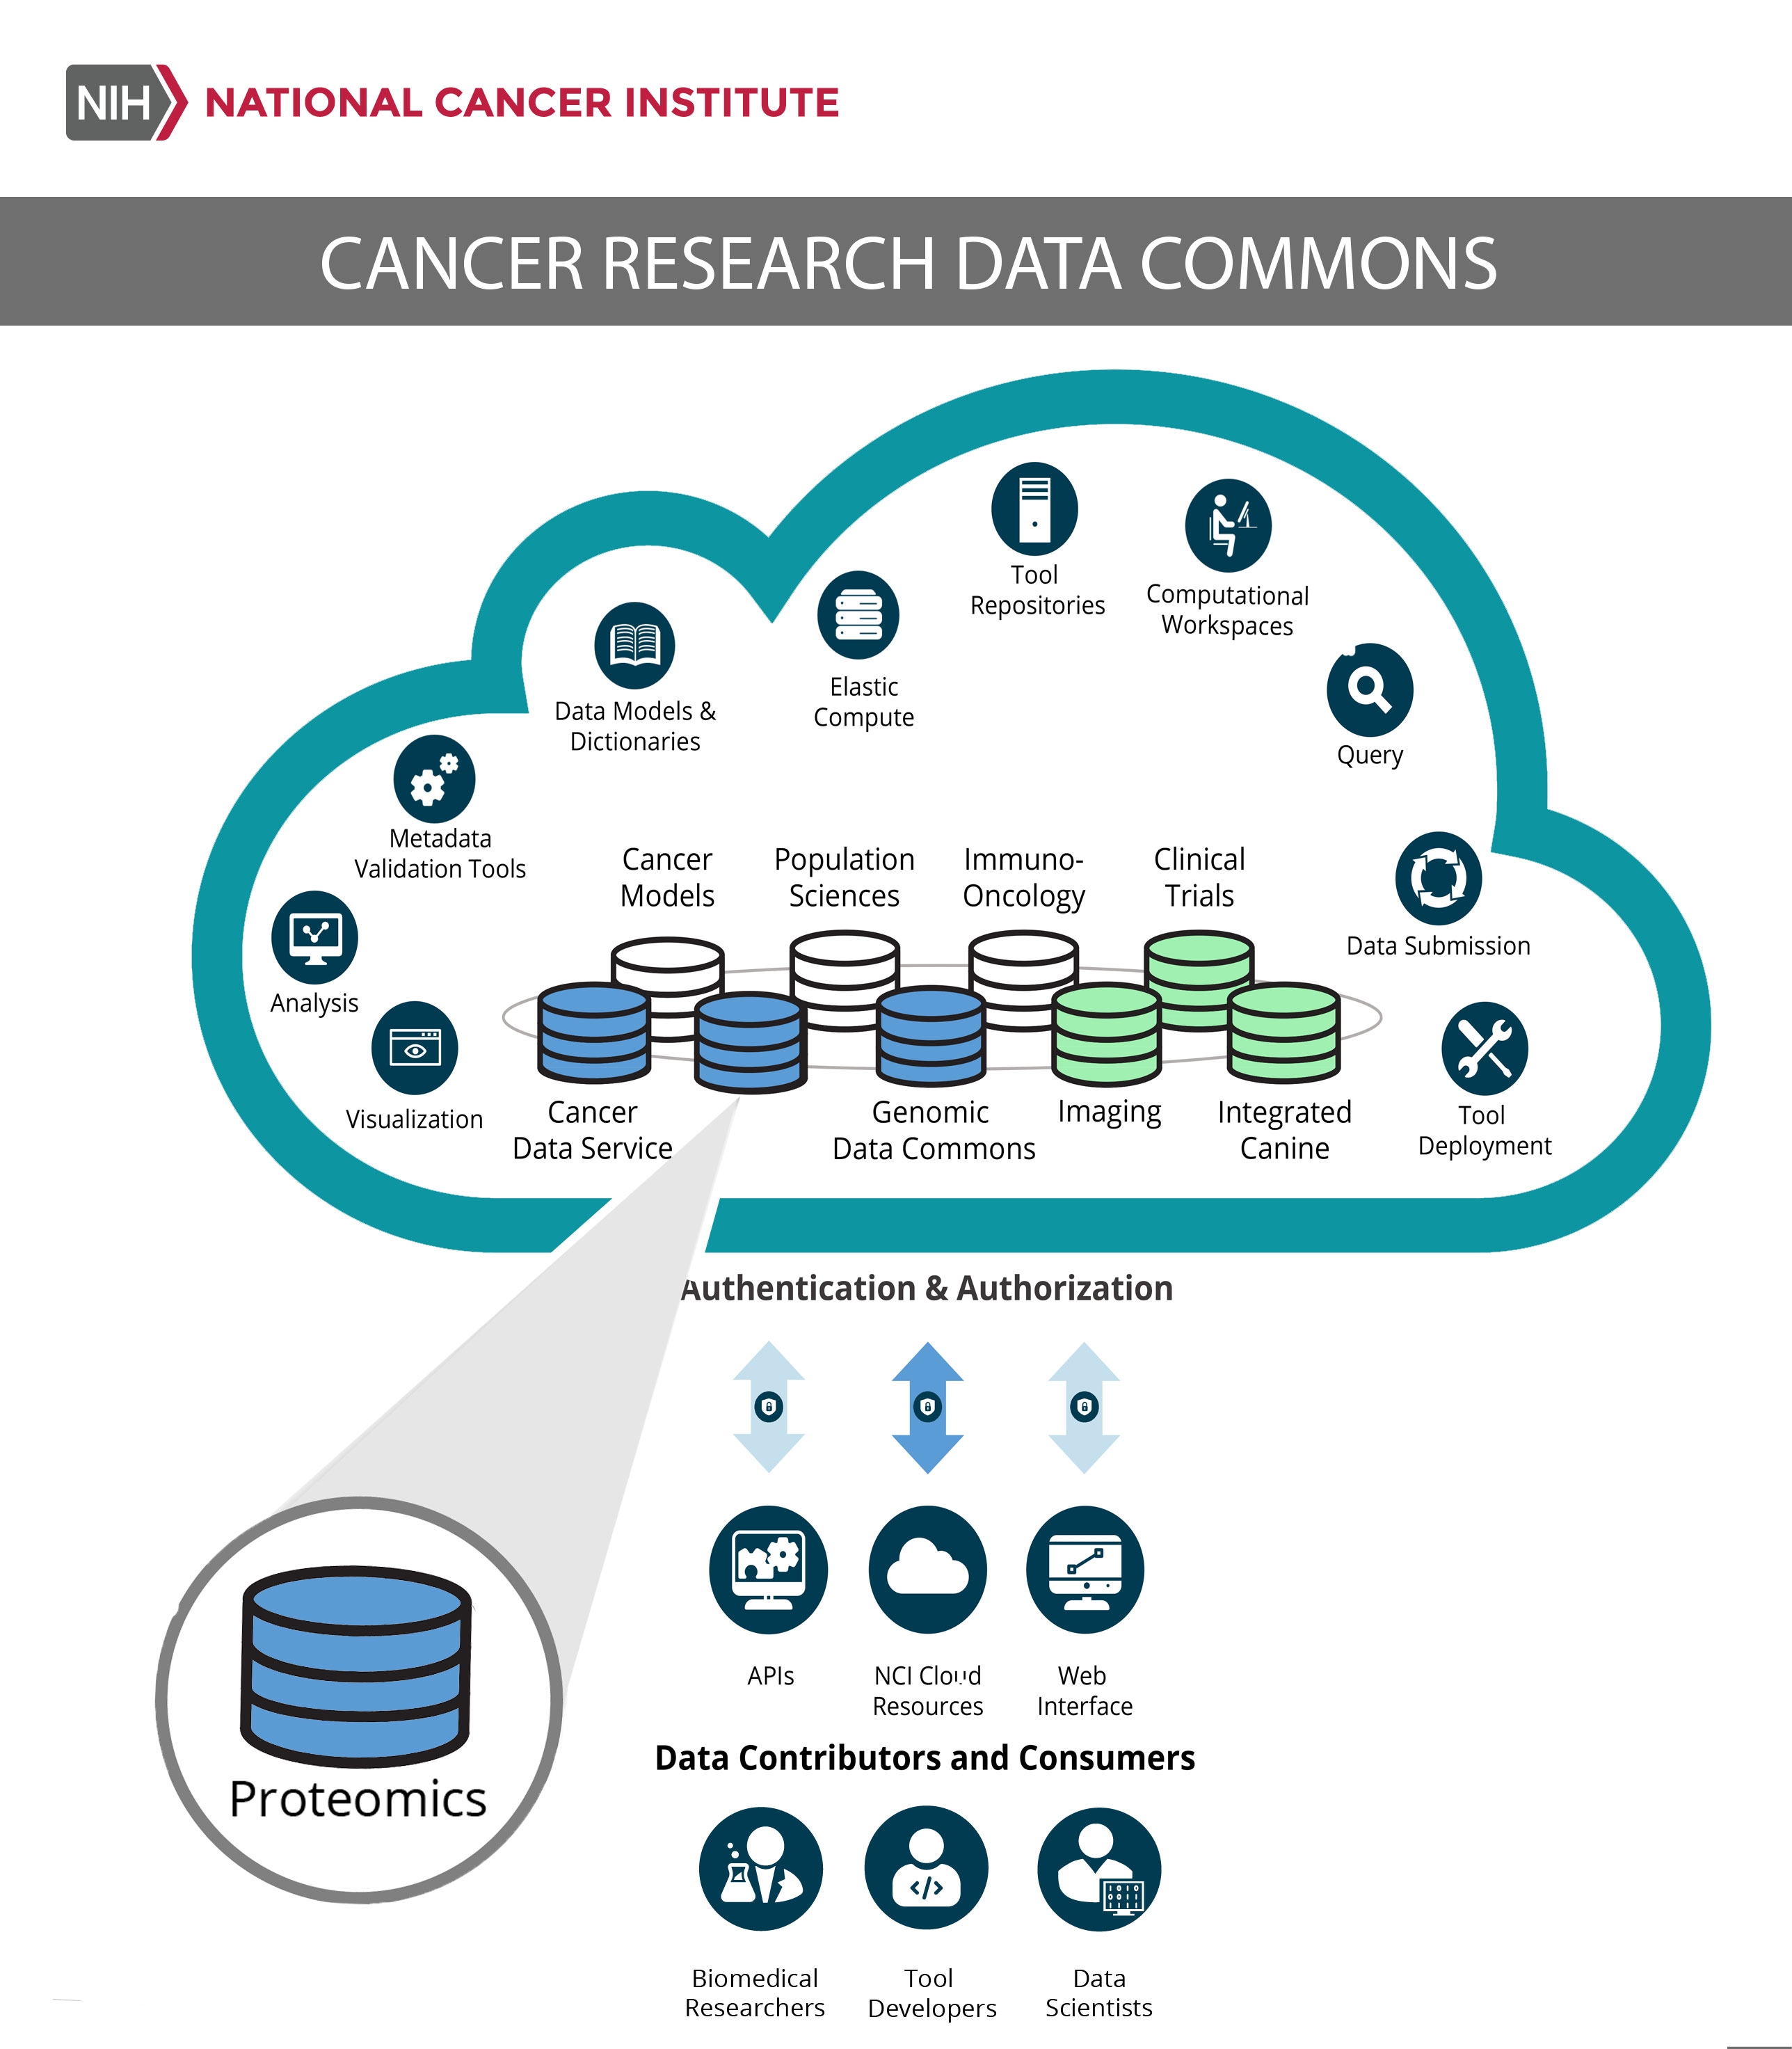 The NCI Cancer Research Data Commons (CRDC) provides biomedical researchers, tool developers, and data scientists with access to data from NCI programs through the nodes like the Proteomics Data Commons. The CRDC allows users to analyze, share, and store results, and is growing to include a wider range of data, including proteomics, imaging, and canine.